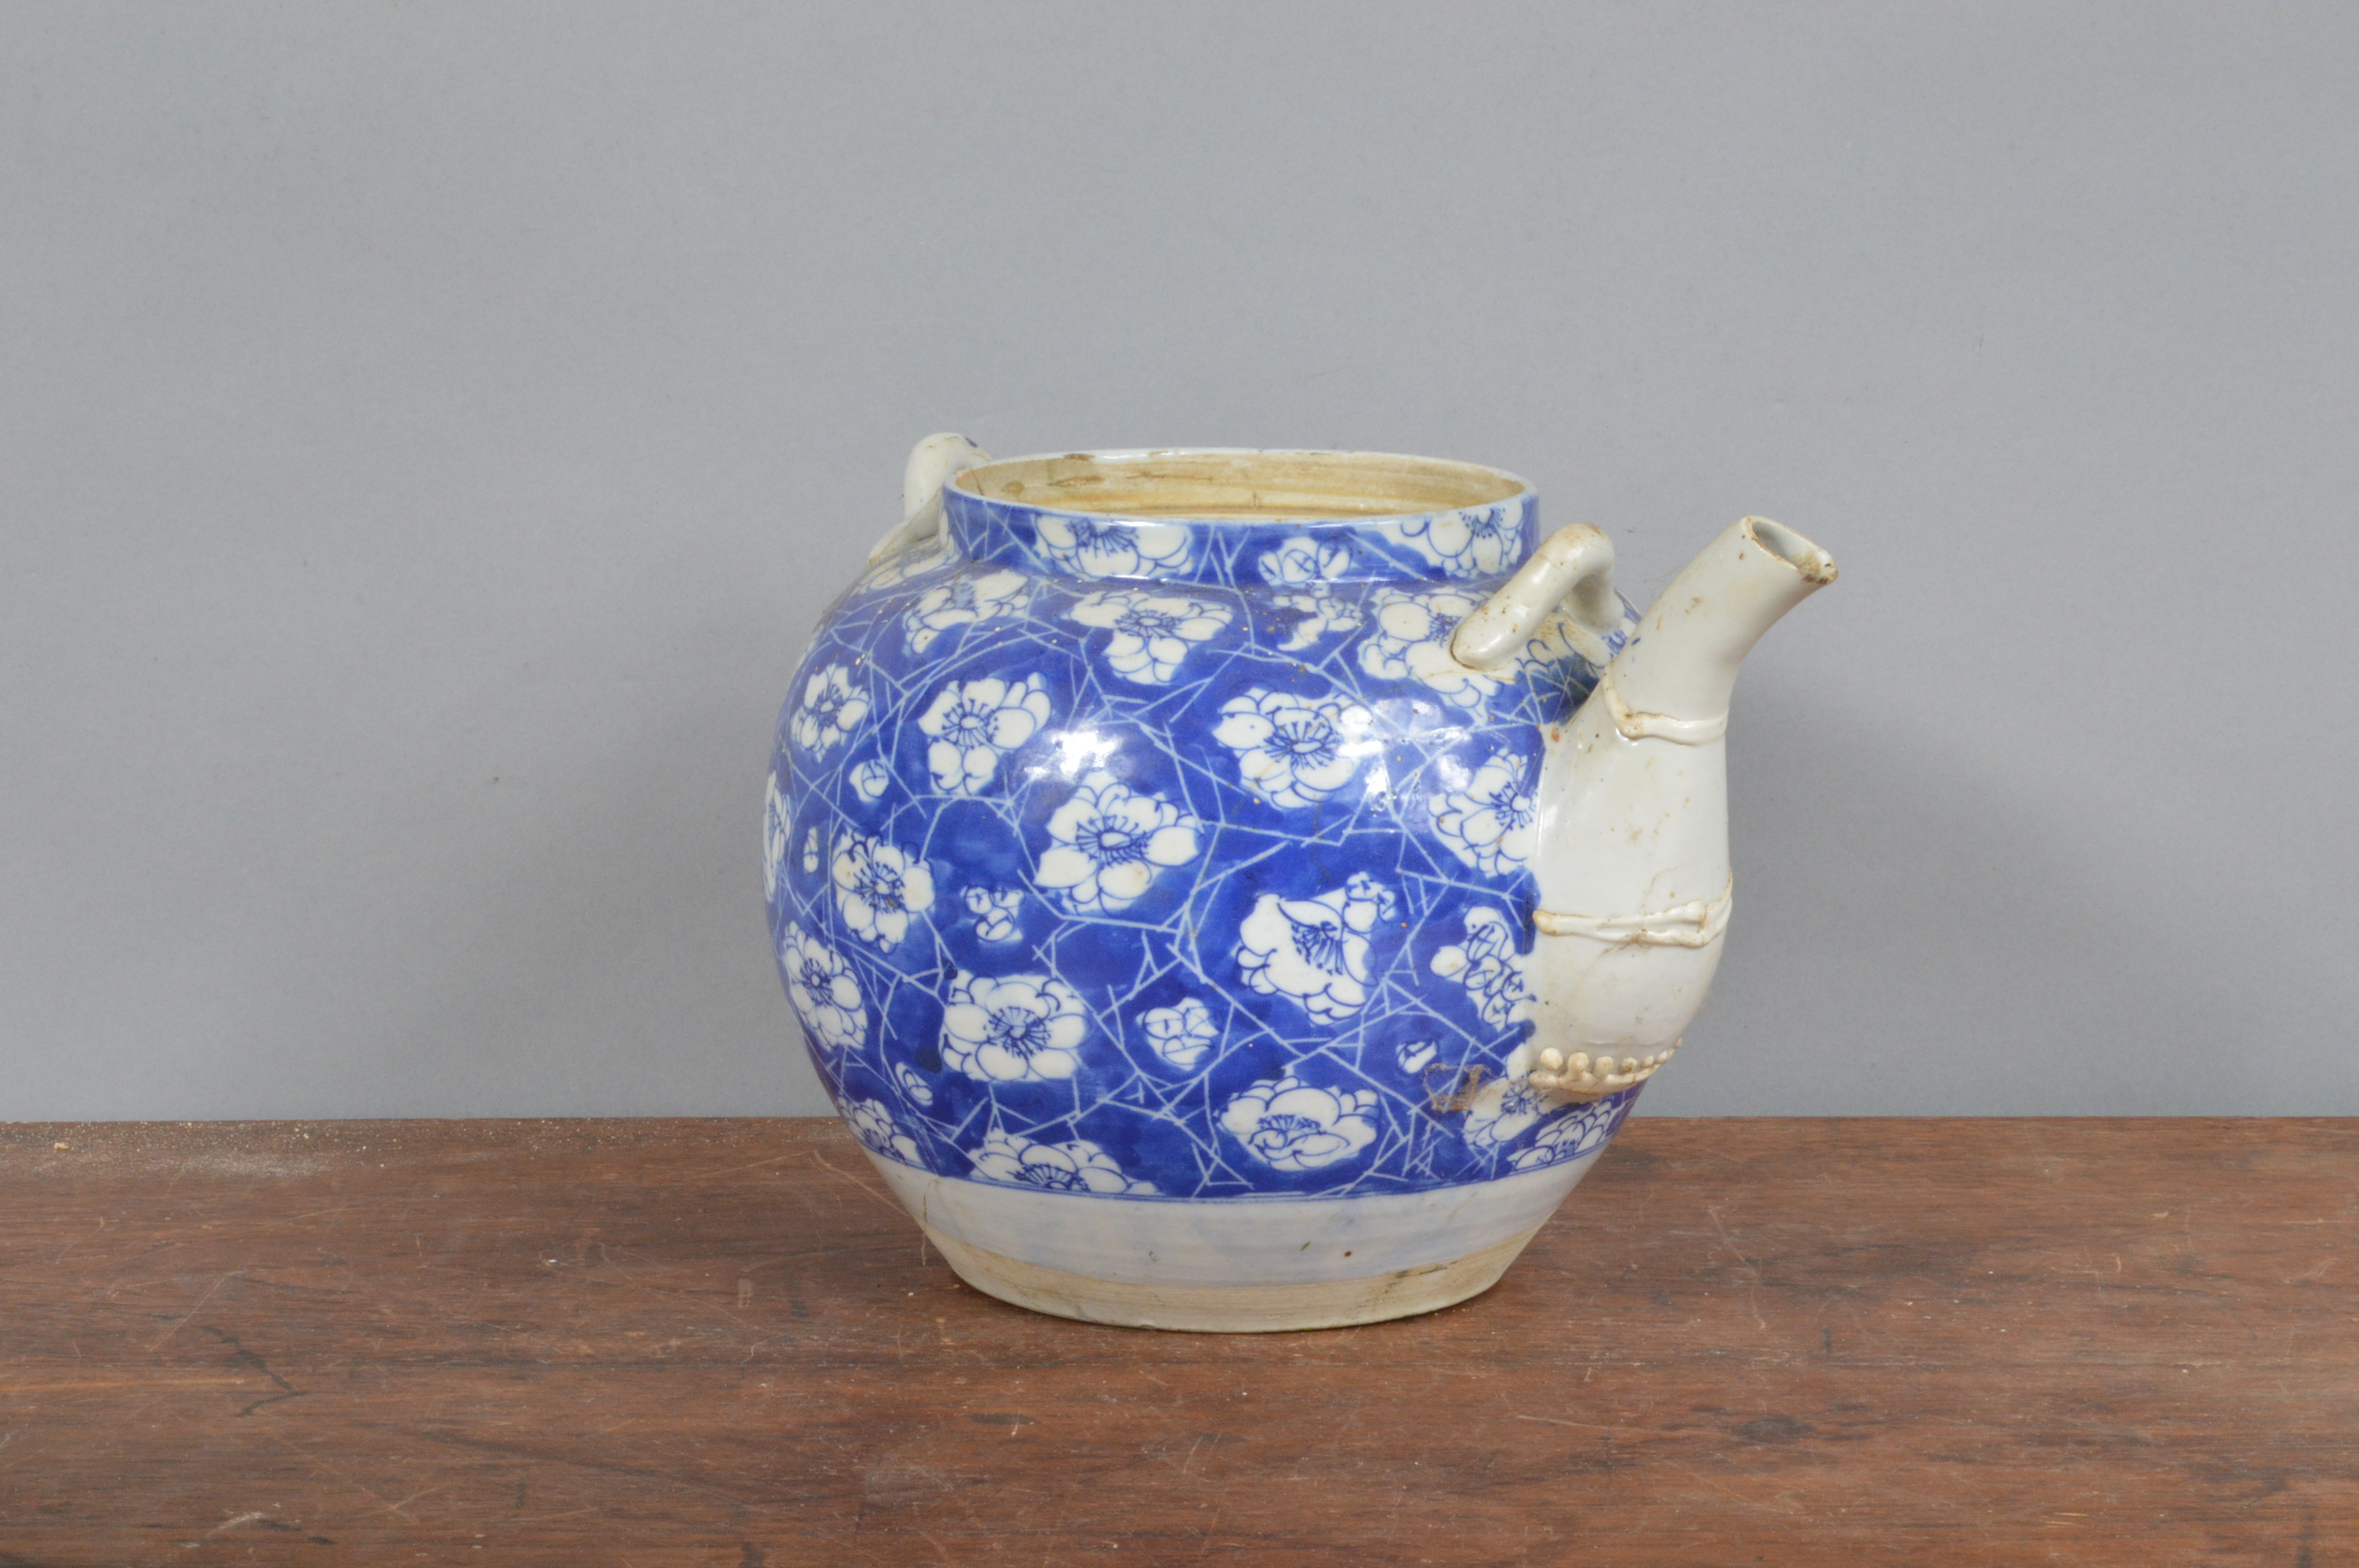 A 19th century Chinese hand-painted blue and white teapot, decorated with cracked ice and prunus. - Image 2 of 2